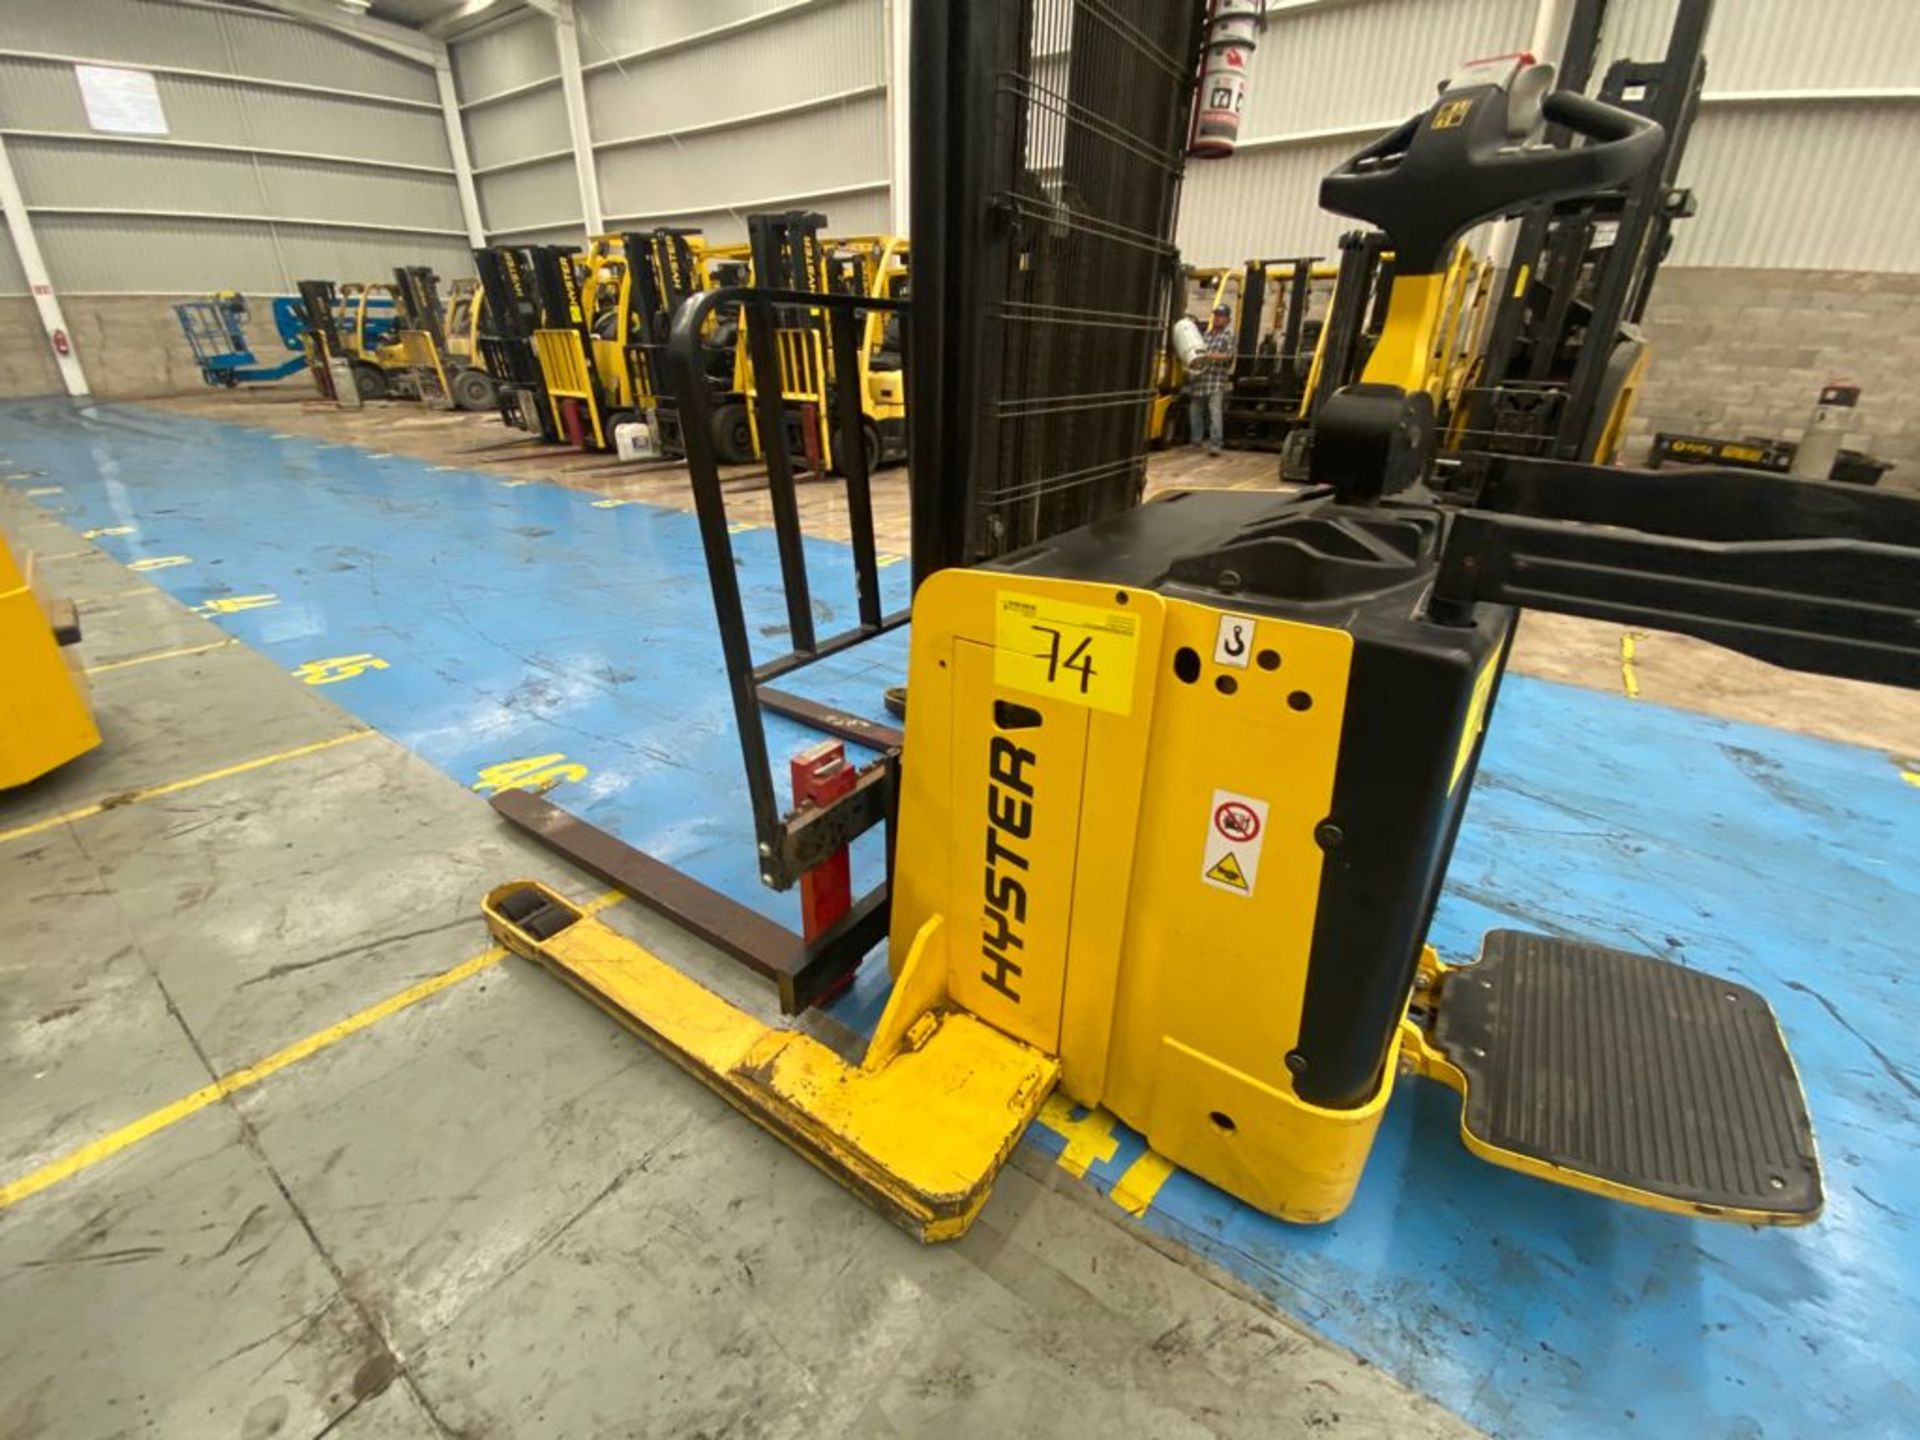 Hyster Electric Platform High Lift Stacker Model S1.5S, SN C442T03146R, Year 2017, 1.5 tons capacity - Image 9 of 34